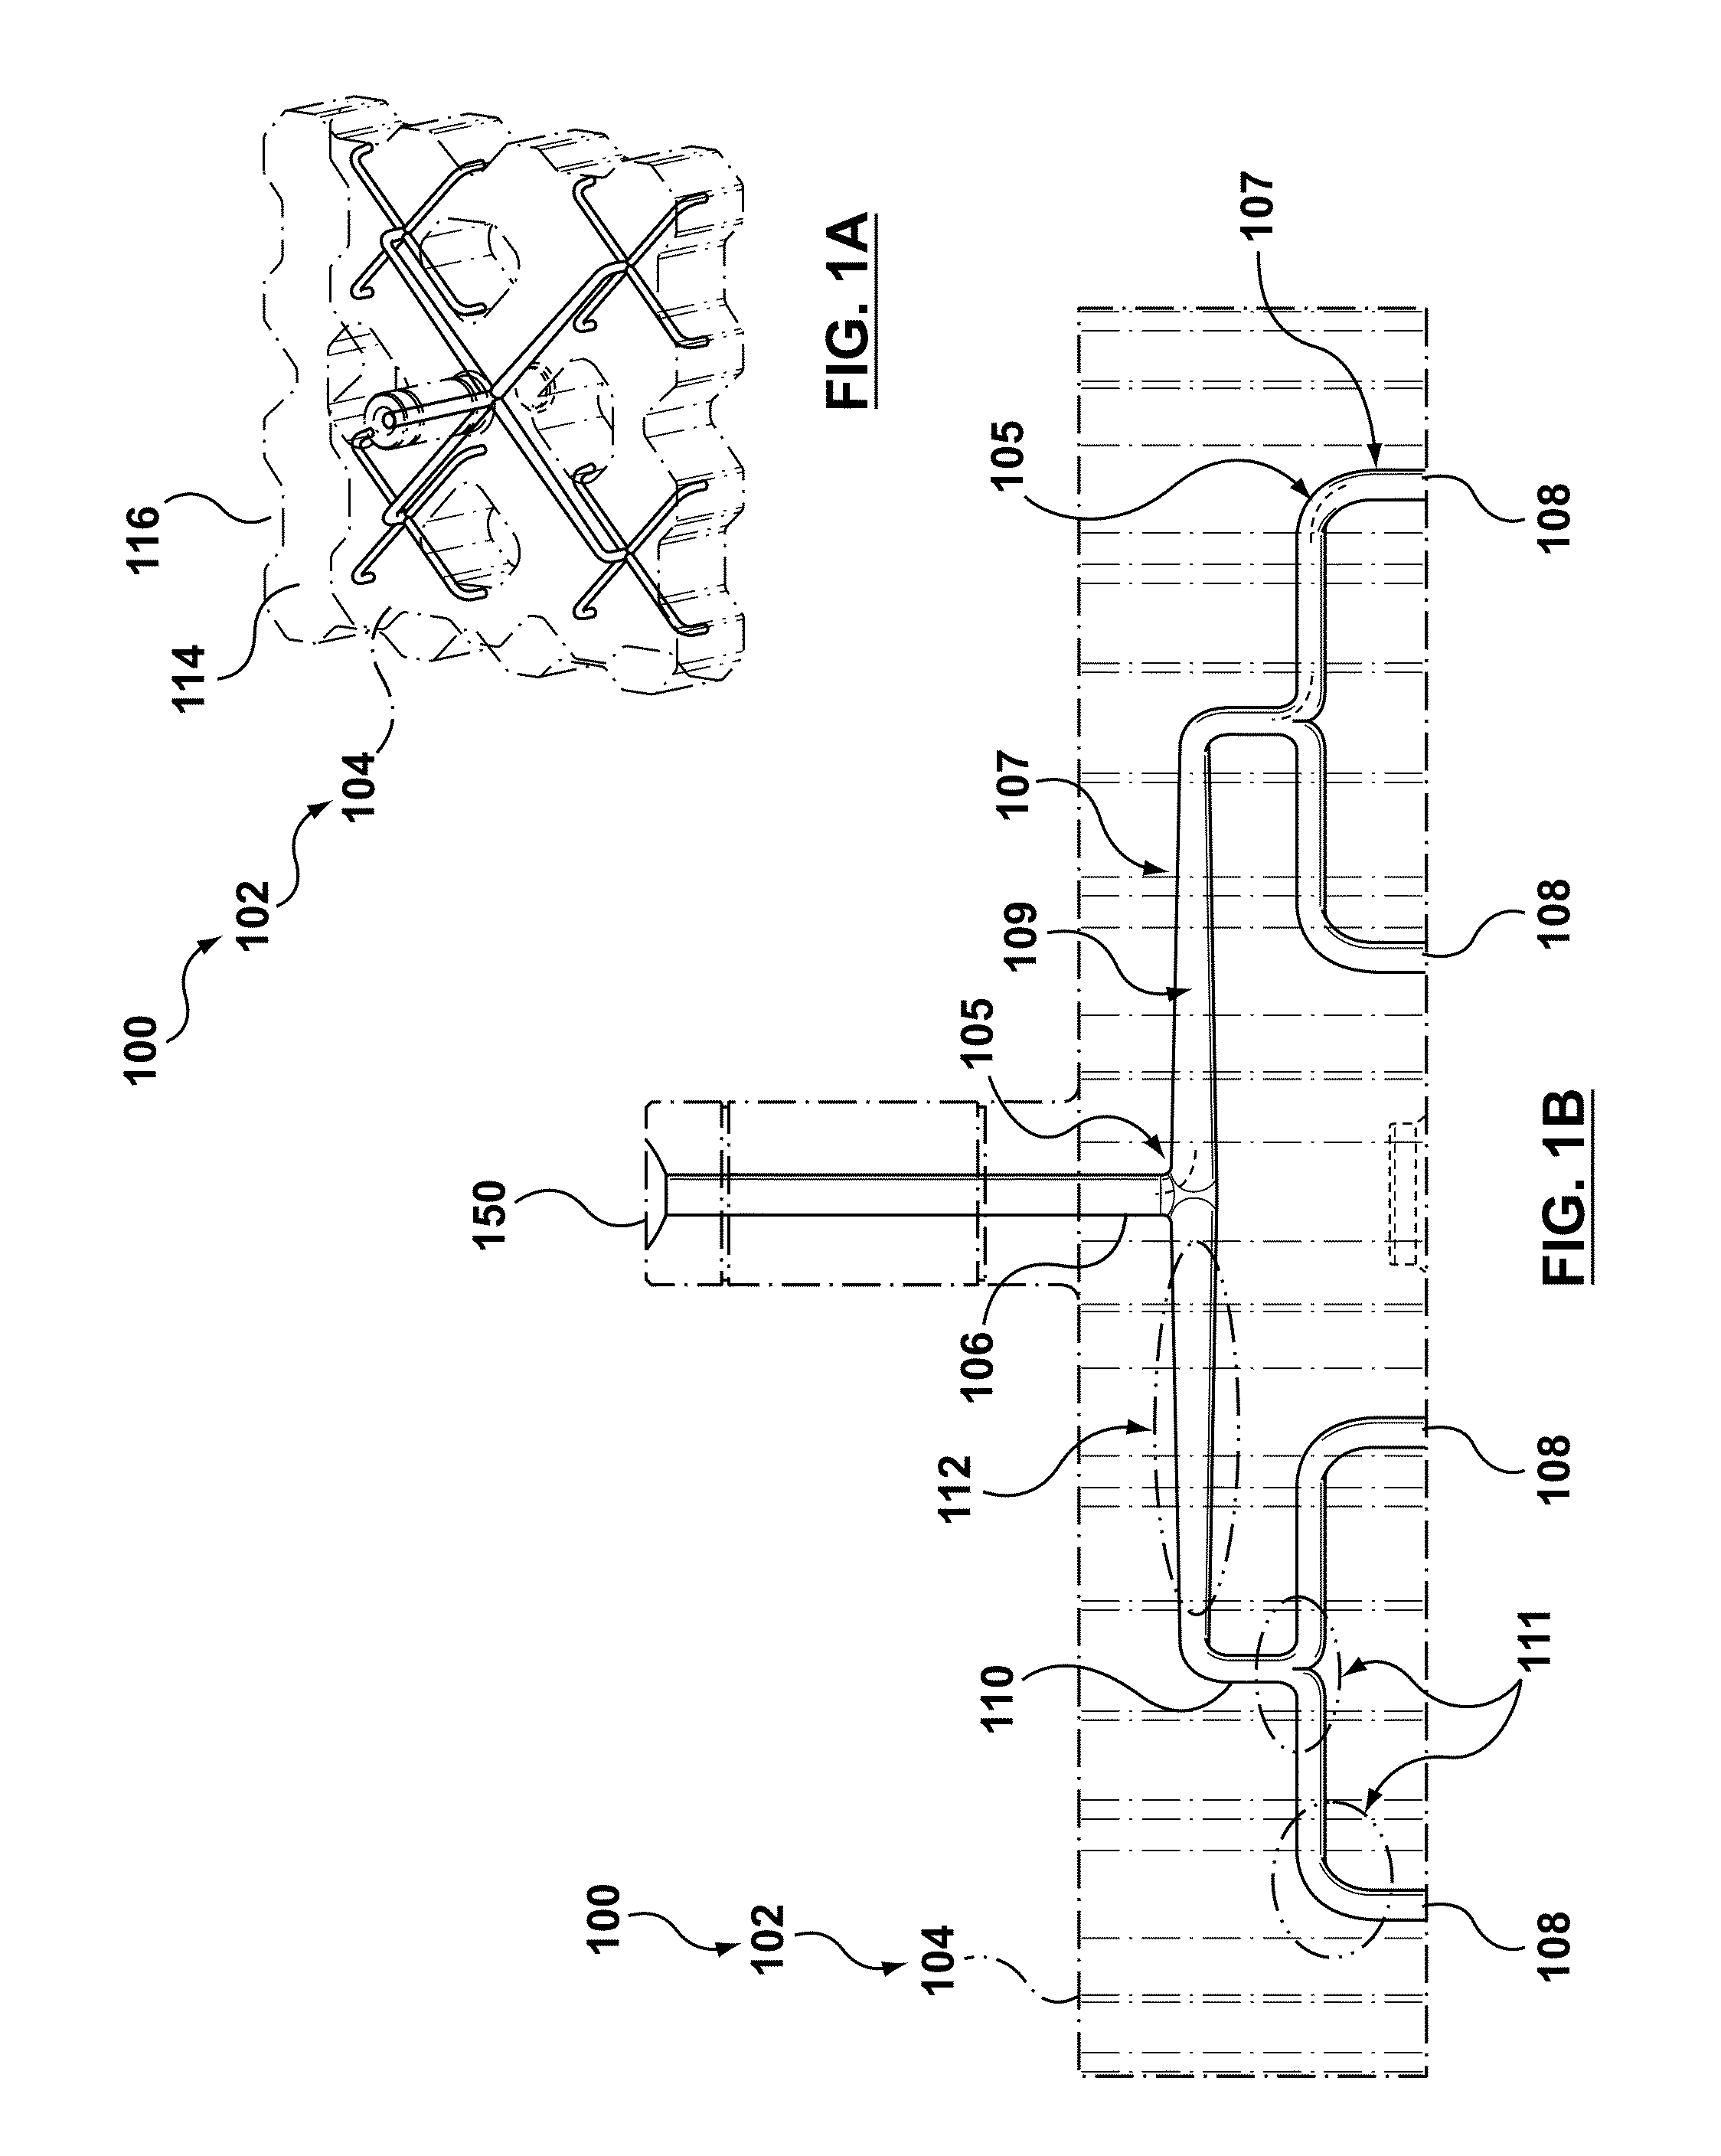 Multi-Property Injection Molding Nozzle for Hot-Runner System